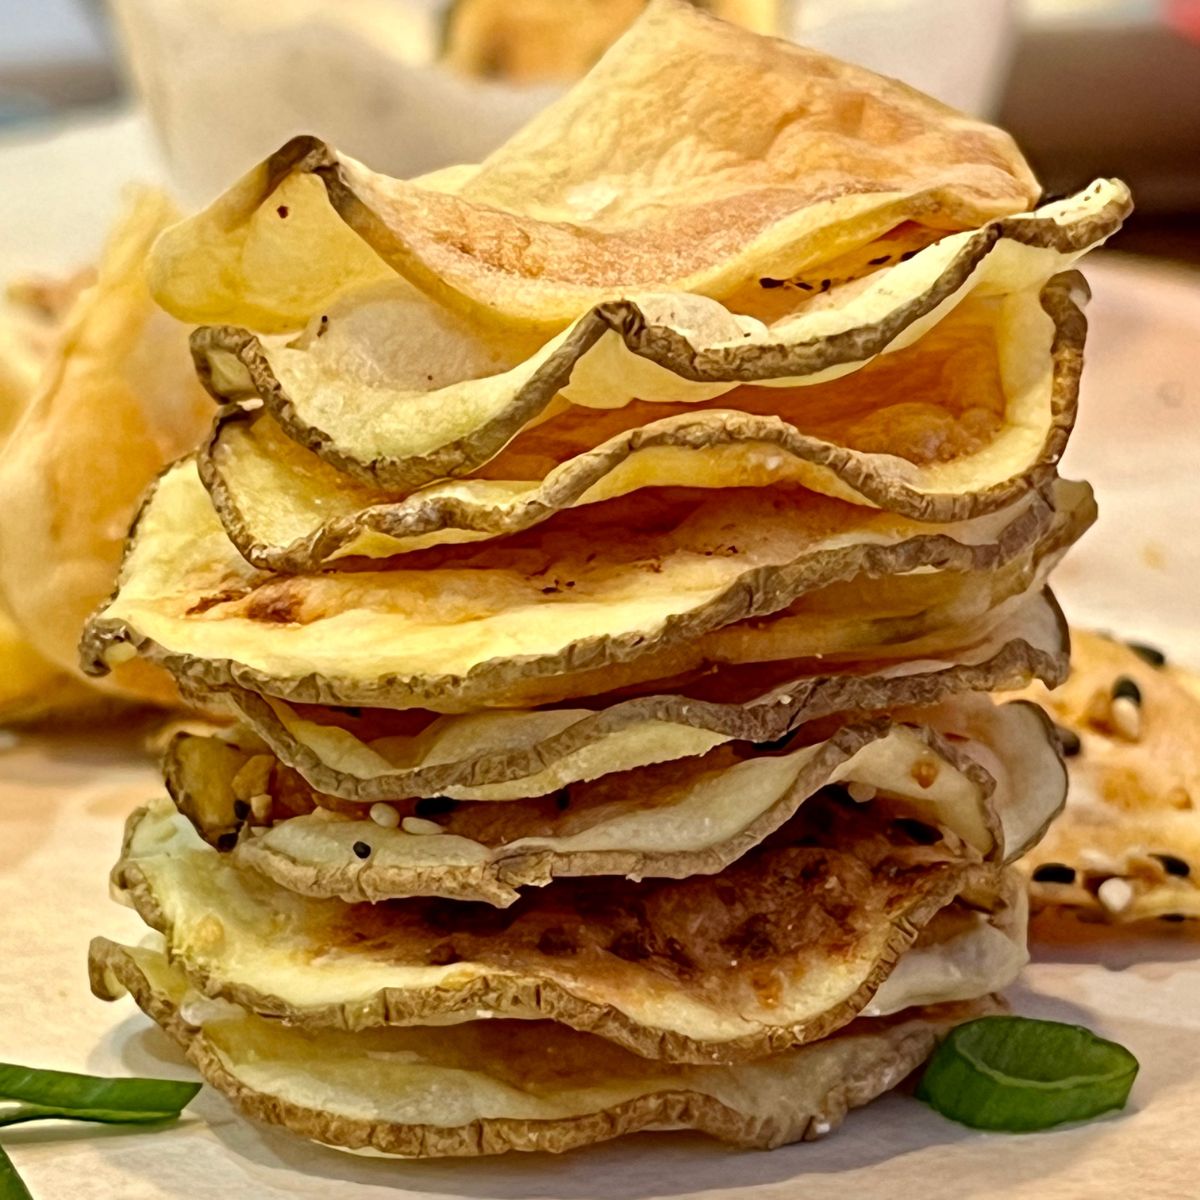 A stack of homemade oil free potato chips